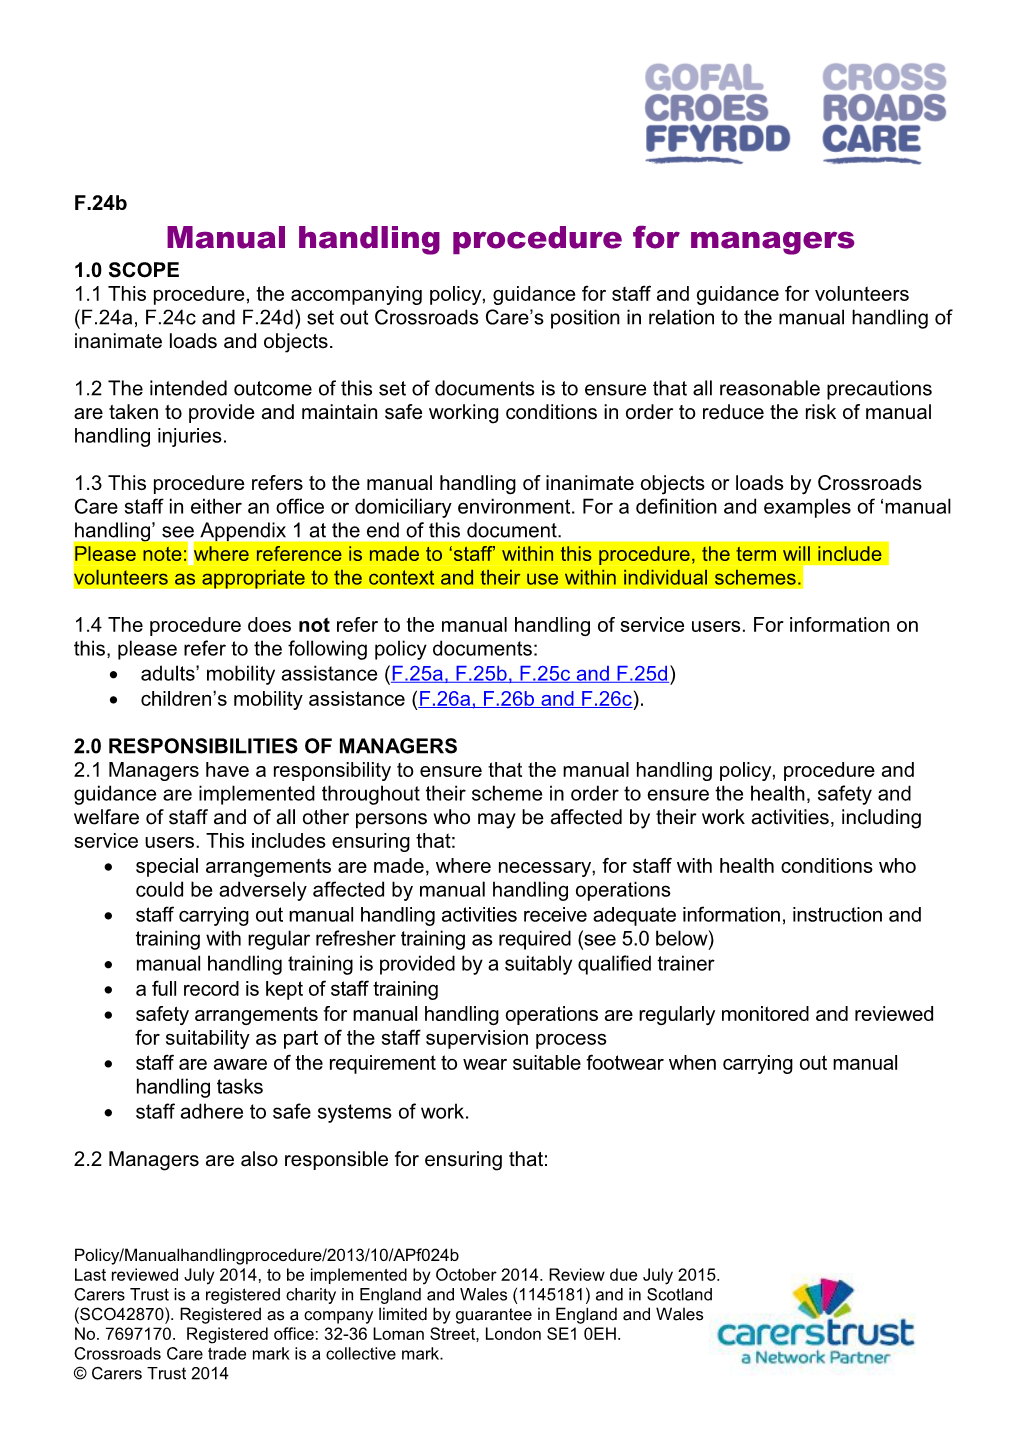 Manual Handling Procedure for Managers